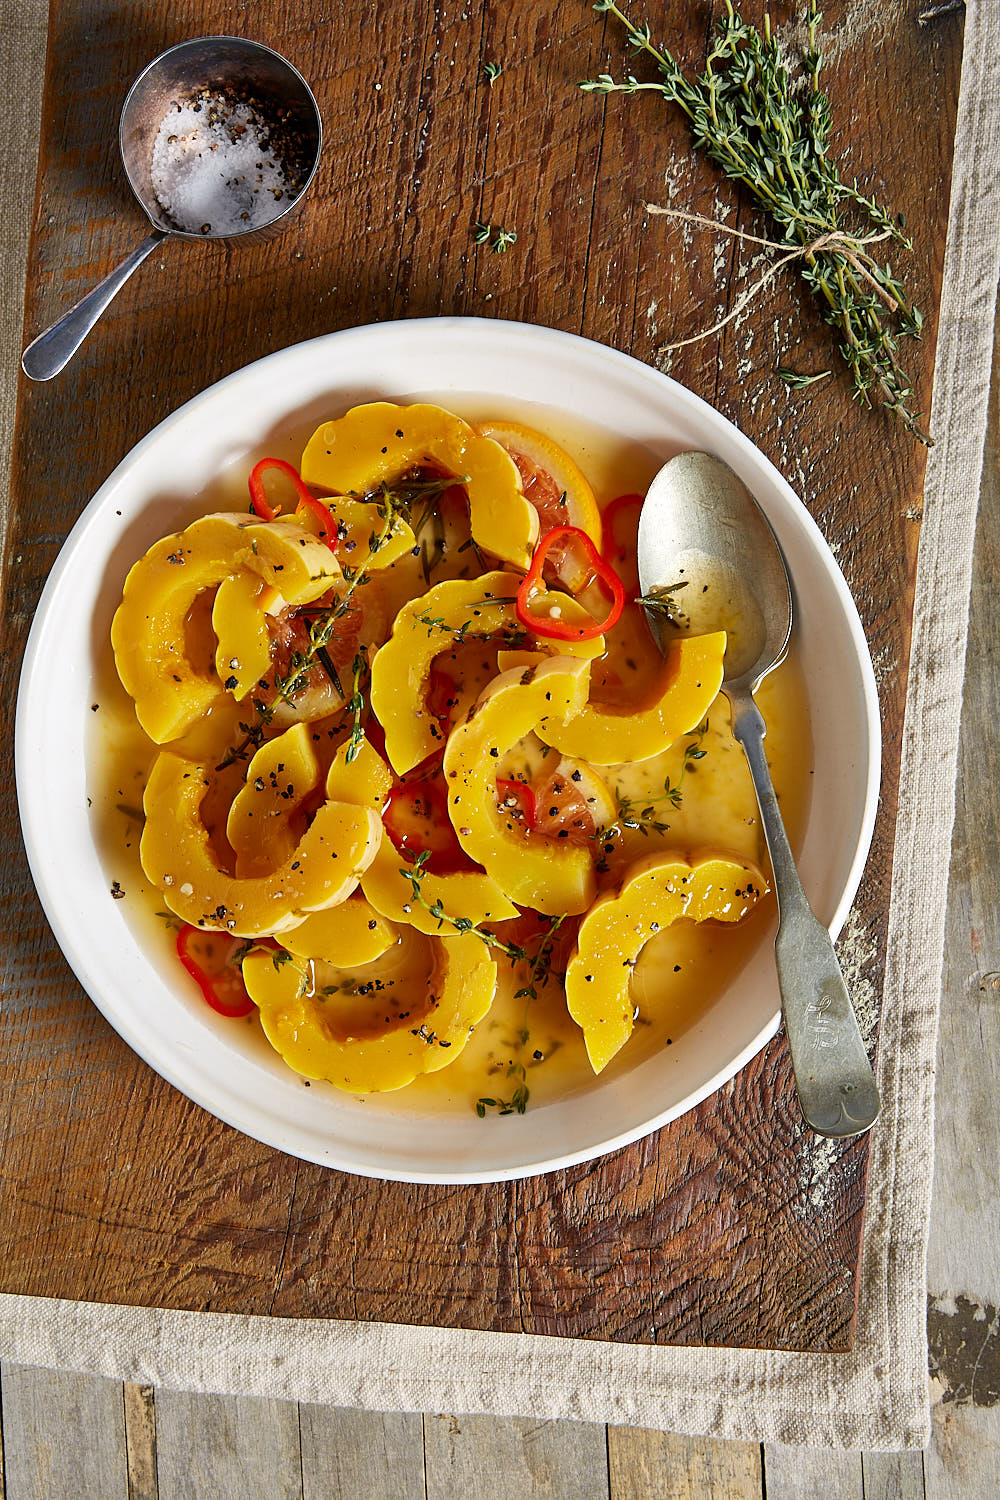 Roasted squash with herbs